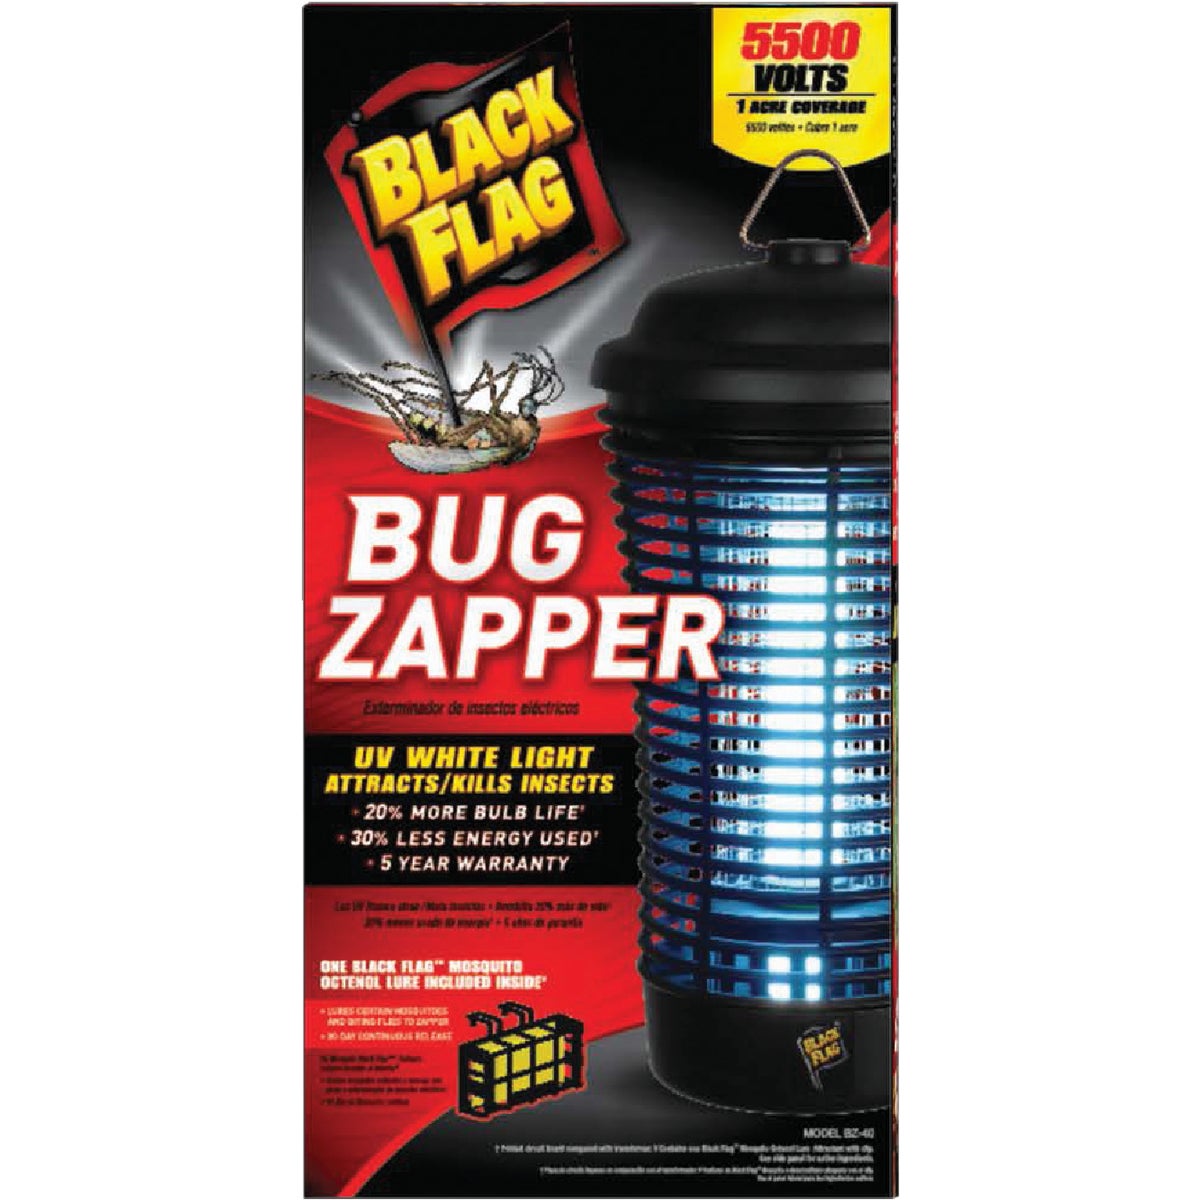 Item 739516, Powerful bug zapper that covers a full acre area, with 5500 volts of power 